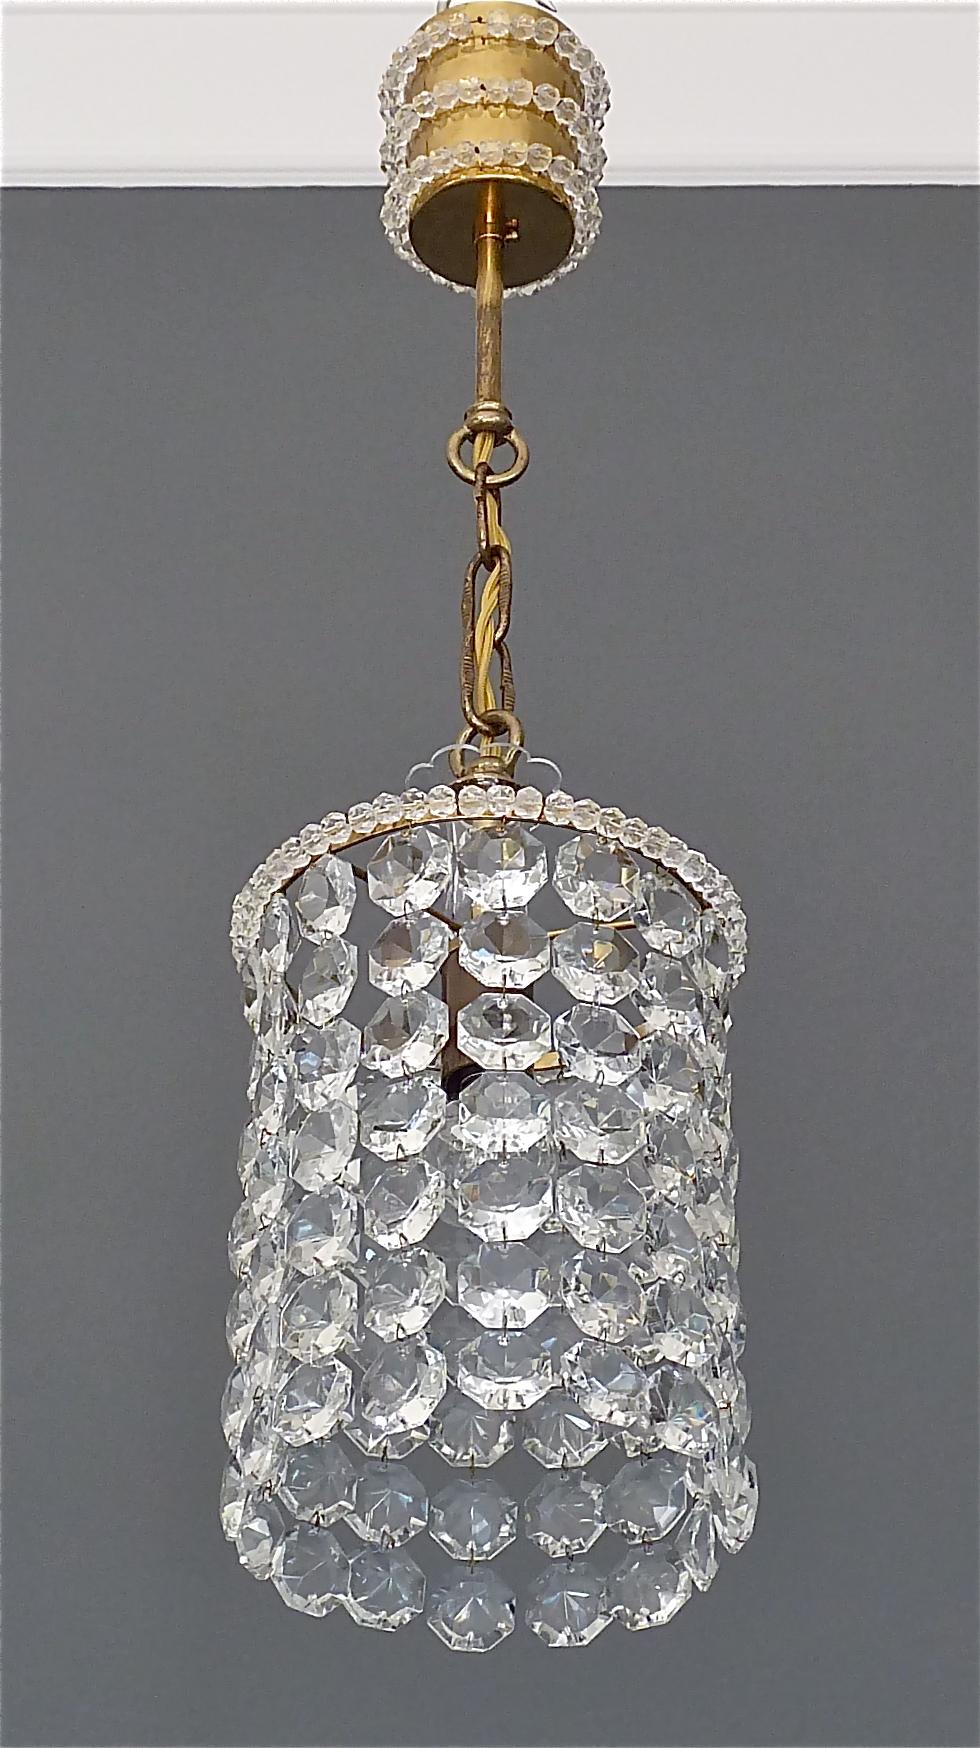 Precious petite midcentury chandelier made by the famous company Bakalowits, Vienna, Austria, circa 1955. The chain hanging height adjustable pendant lamp is made of patinated brass and lots of octagonal cut-glass crystal beads and pearls. The